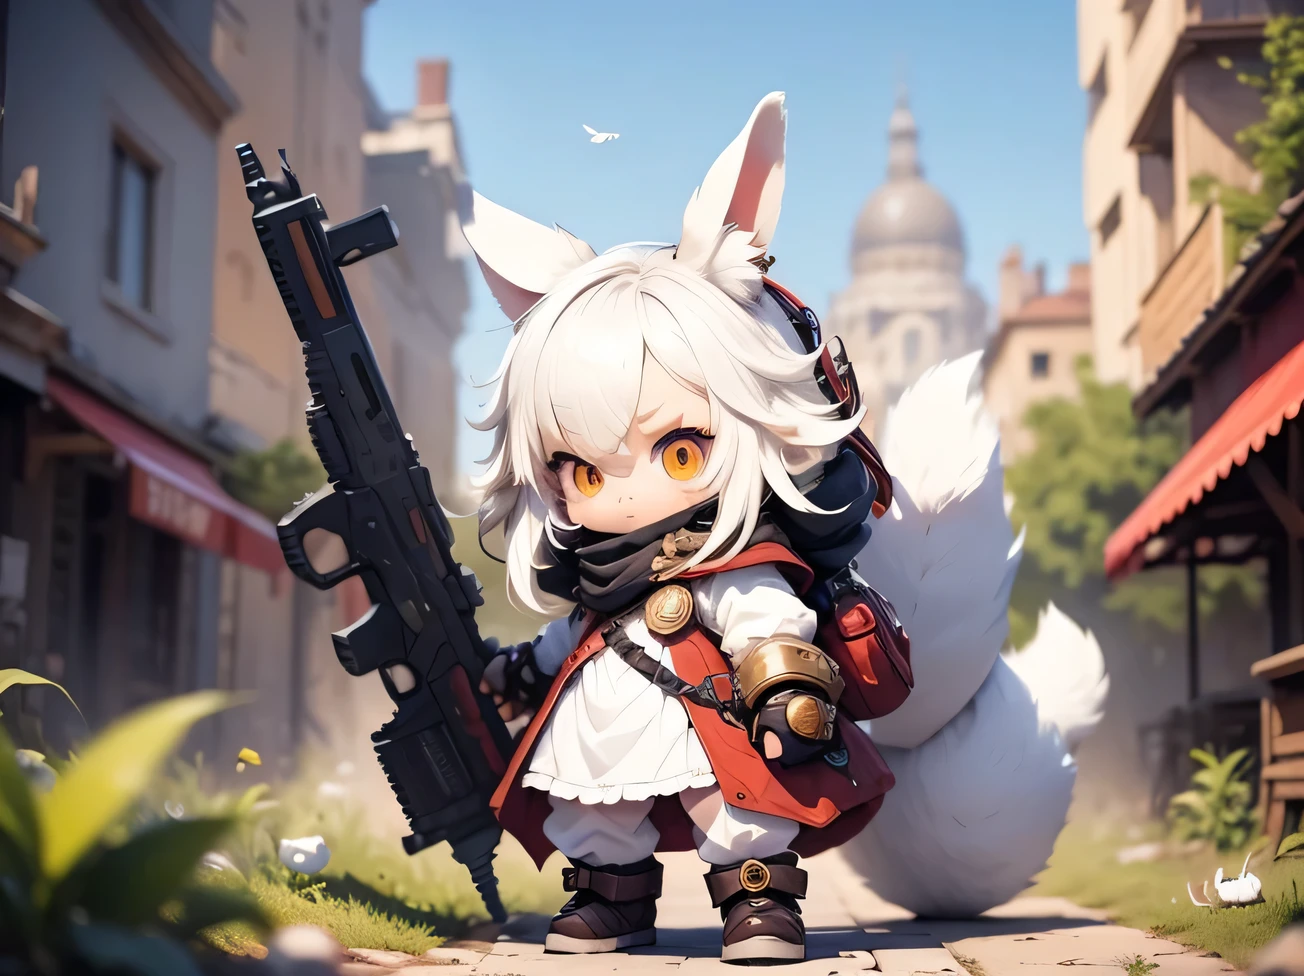 solo,1female\((chibi:1.8),cute,kawaii,small kid,(white hair:1.7),(very long hair:1.7),bangs,(ear\(fluffy white rabbit-ear\):1.3),(only 1small rabbit-tail at hip:1.2),(red eye),big eye,beautiful shiny eye,skin color white,big hairbow,(costume\(combat suit,bodysuit,(very tight:1.5),(show body line:1.2),weapons\)),breast,shooting and aiming a laser gun to giant monster cat\), BREAK ,background\(city of Rubble,giant cats are destroying the city\),(close up female), BREAK ,quality\(8k,wallpaper of extremely detailed CG unit, ​masterpiece,hight resolution,top-quality,top-quality real texture skin,hyper realisitic,increase the resolution,RAW photos,best qualtiy,highly detailed,the wallpaper,golden ratio\)